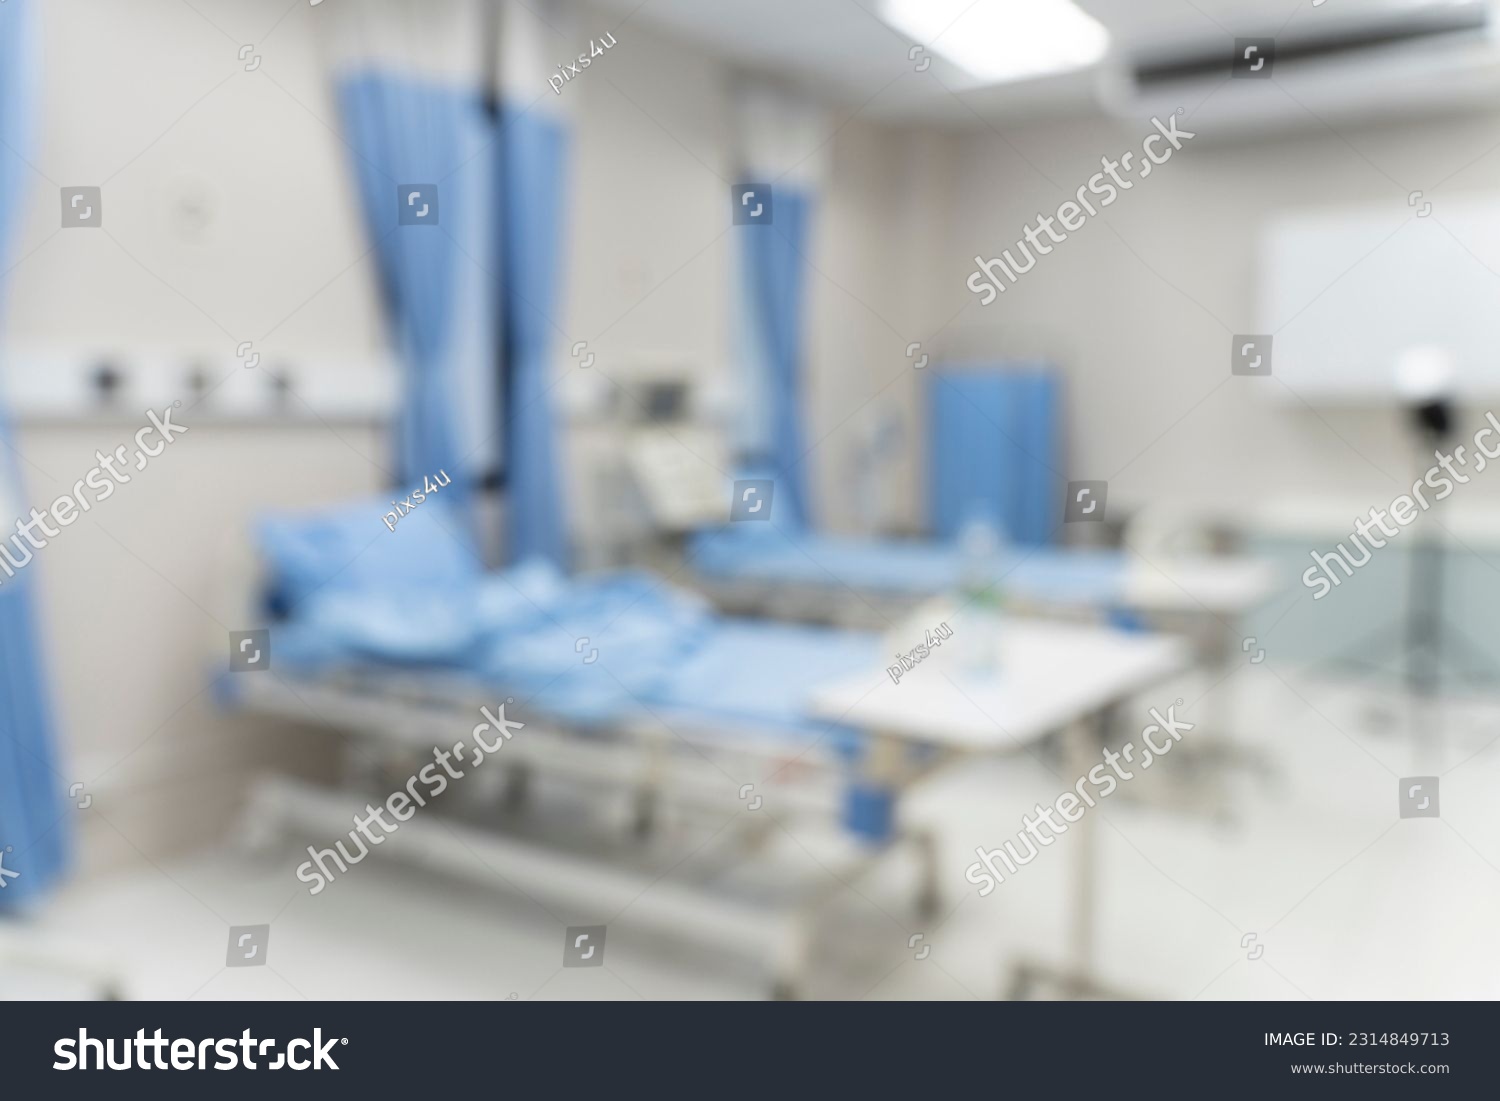 Blurred image background with Empty emergency room, intensive care room, intensive care unit, medical beds with equipment in hospital or clinic #2314849713